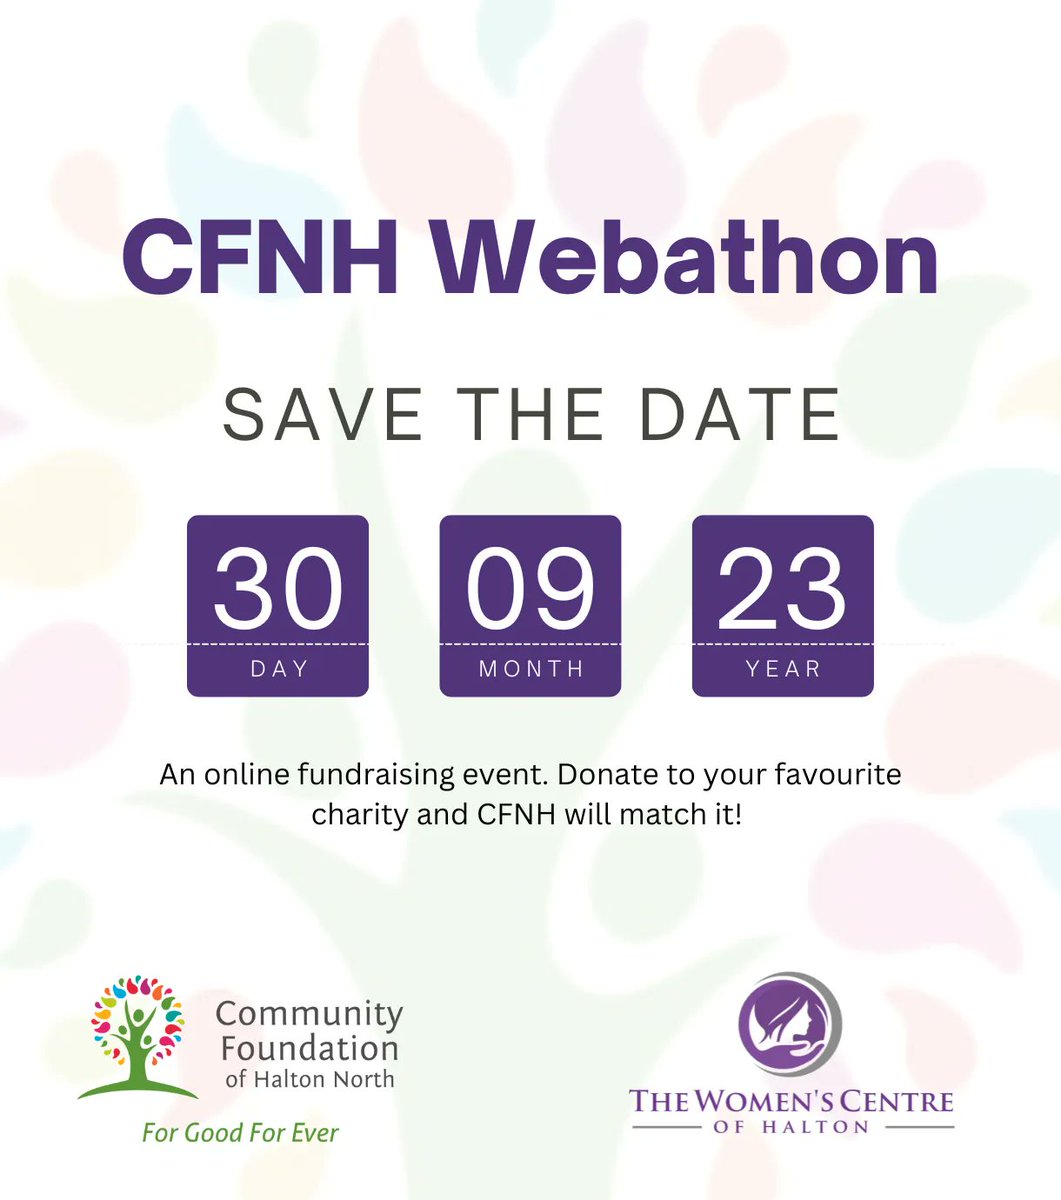 Circle September 30th in your calendar! 

This year, we are excited to participate in the Community Foundations of Halton North’s third annual online fundraising event - CFHN Webathon 2023!

Stay tuned for details!

#CFHNWebathon2023 #forgoodforever